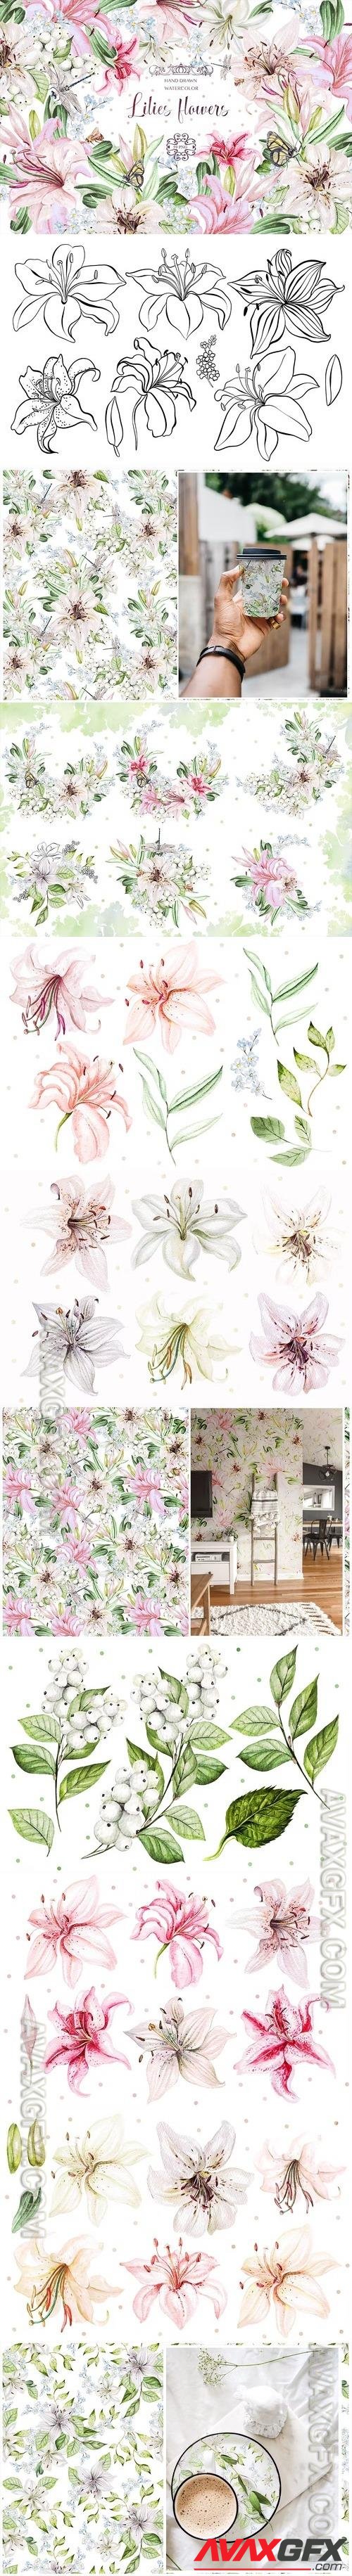 Hand Drawn watercolor flowers lily 2 LAQ9Q6C